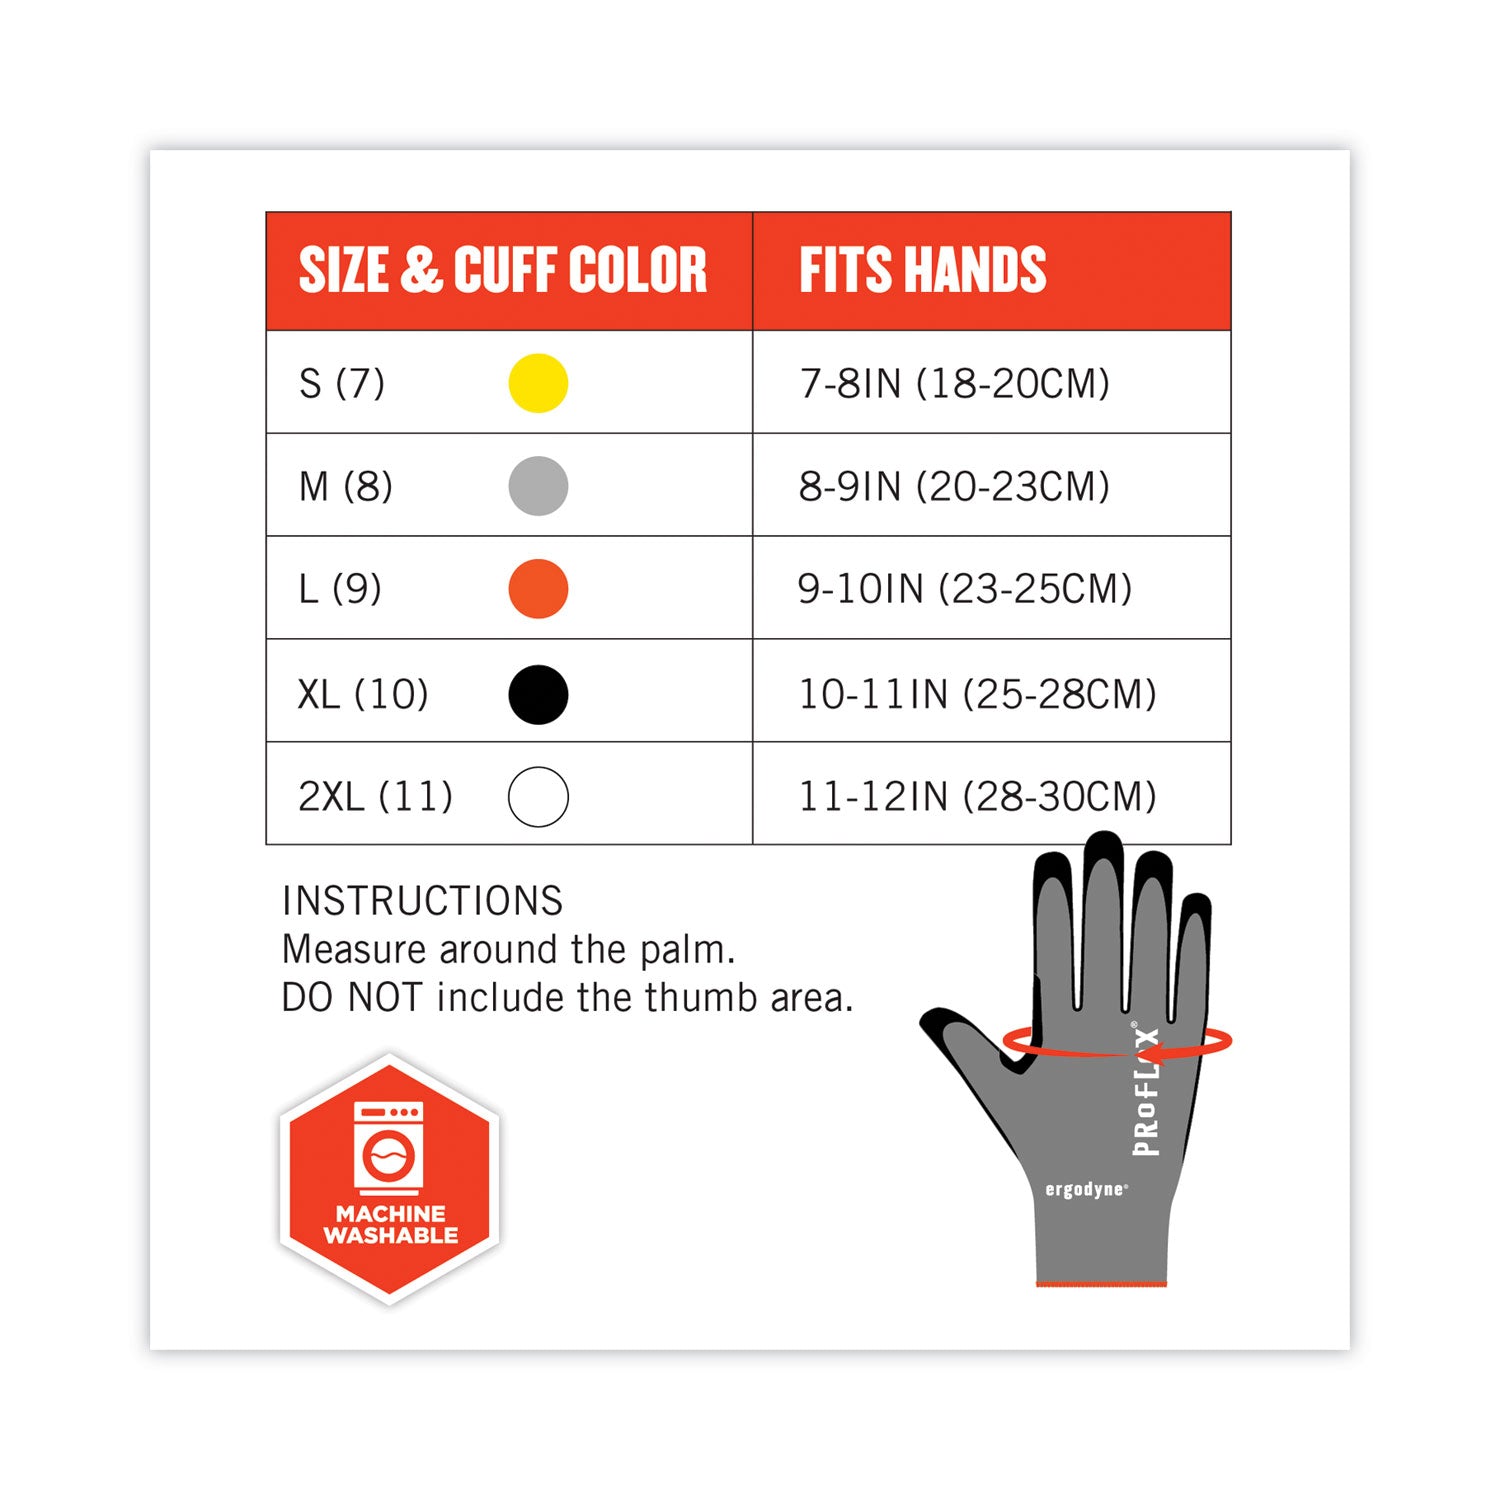 proflex-7072-ansi-a7-nitrile-coated-cr-gloves-gray-small-12-pairs-pack-ships-in-1-3-business-days_ego10302 - 2